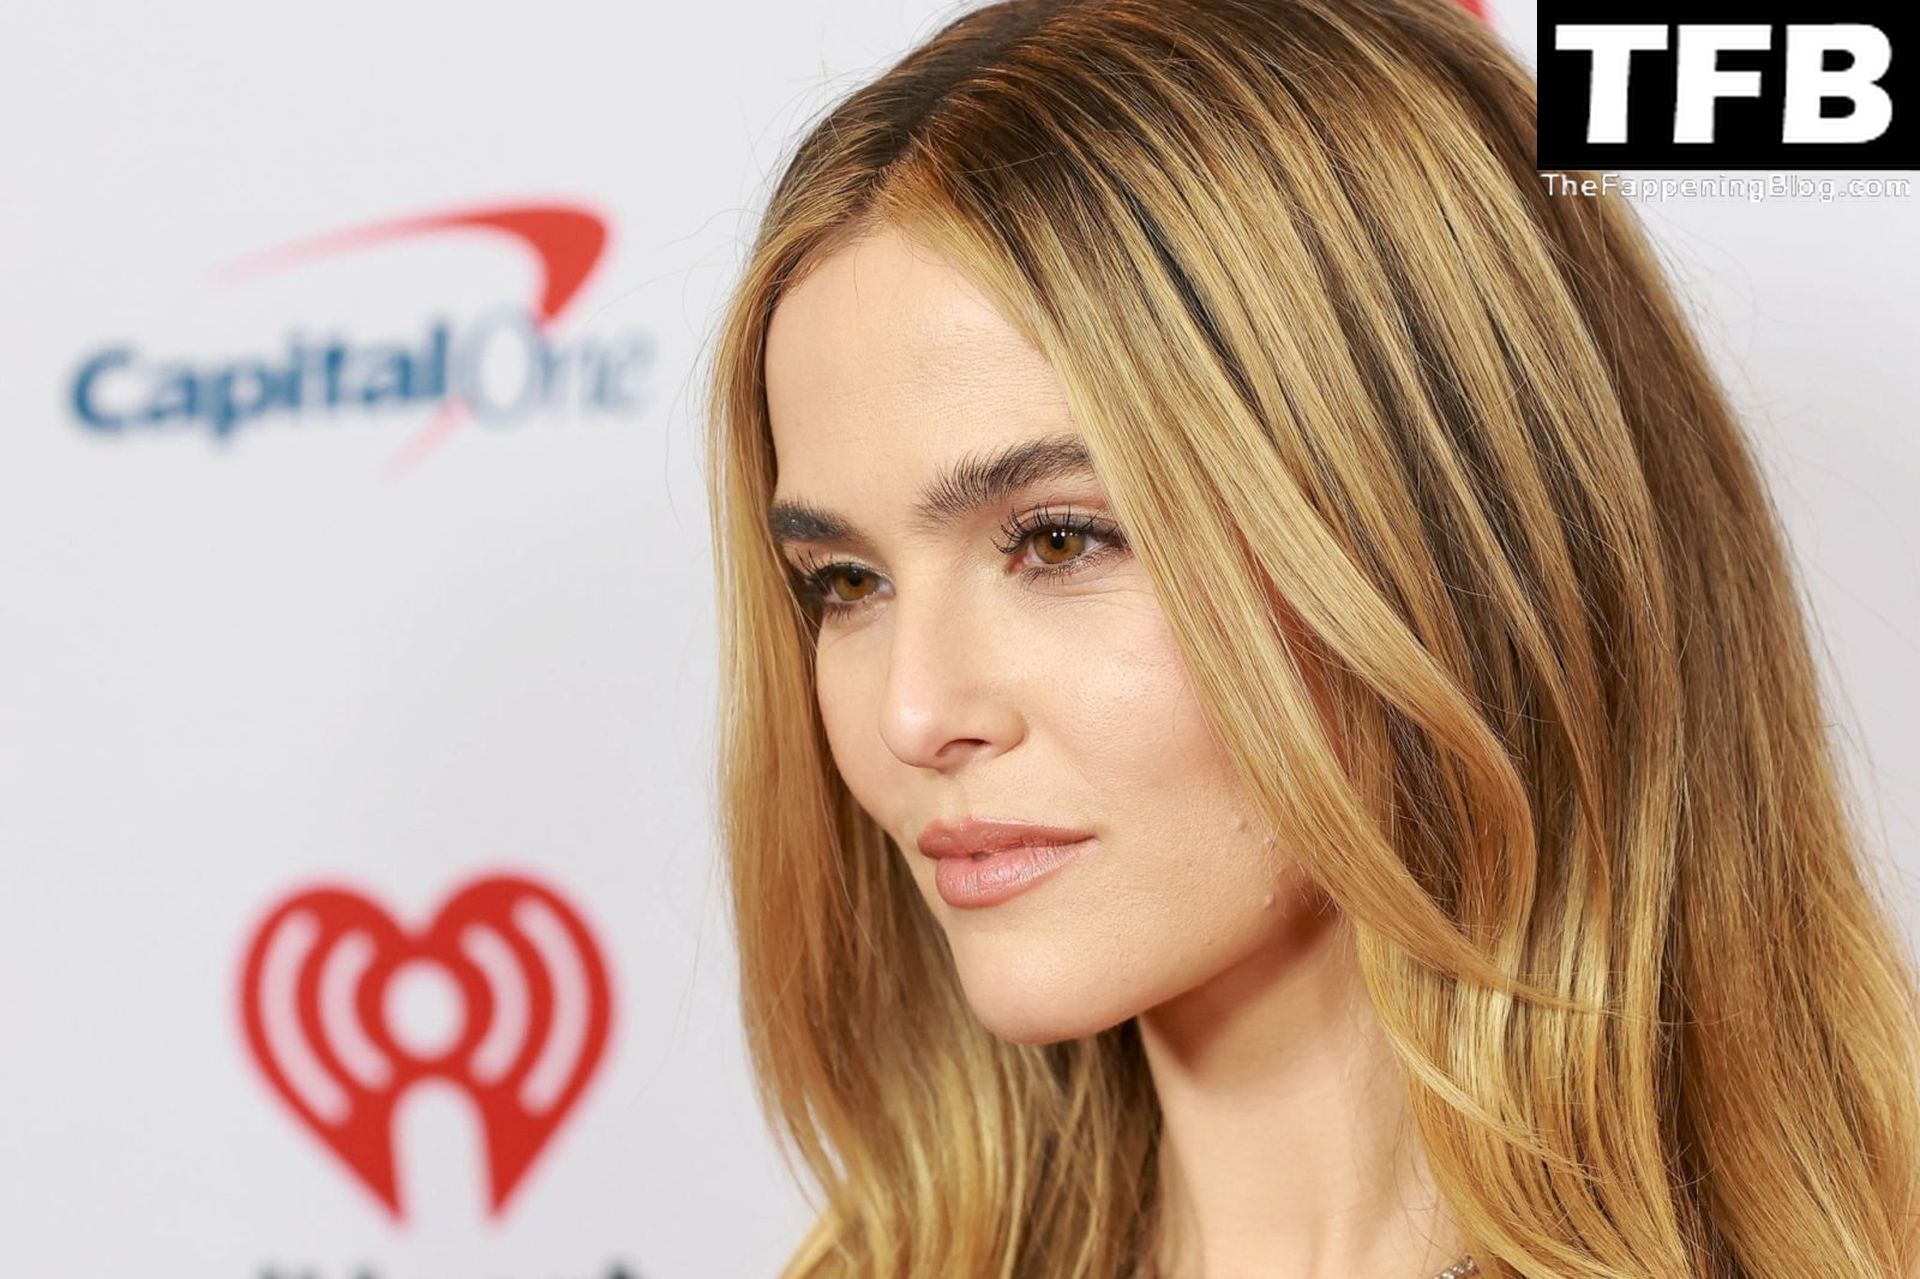 Zoey Deutch Shows Off Her Beautiful Figure at iHeartRadio Z100’s Jingle Ball in New York (37 Photos)